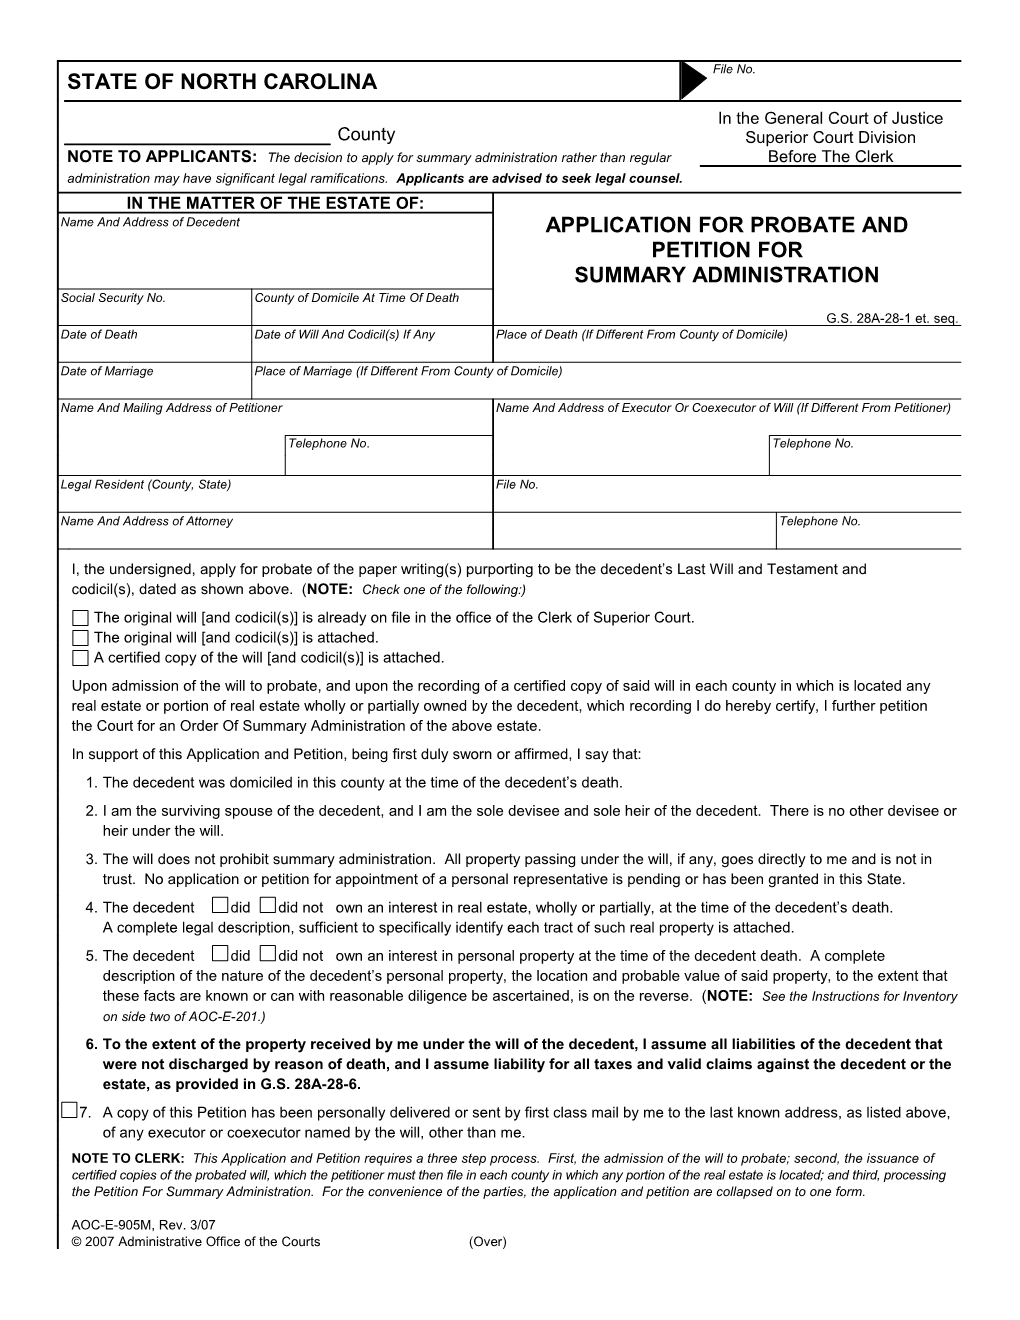 Application for Probate & Petition for Summary Administration